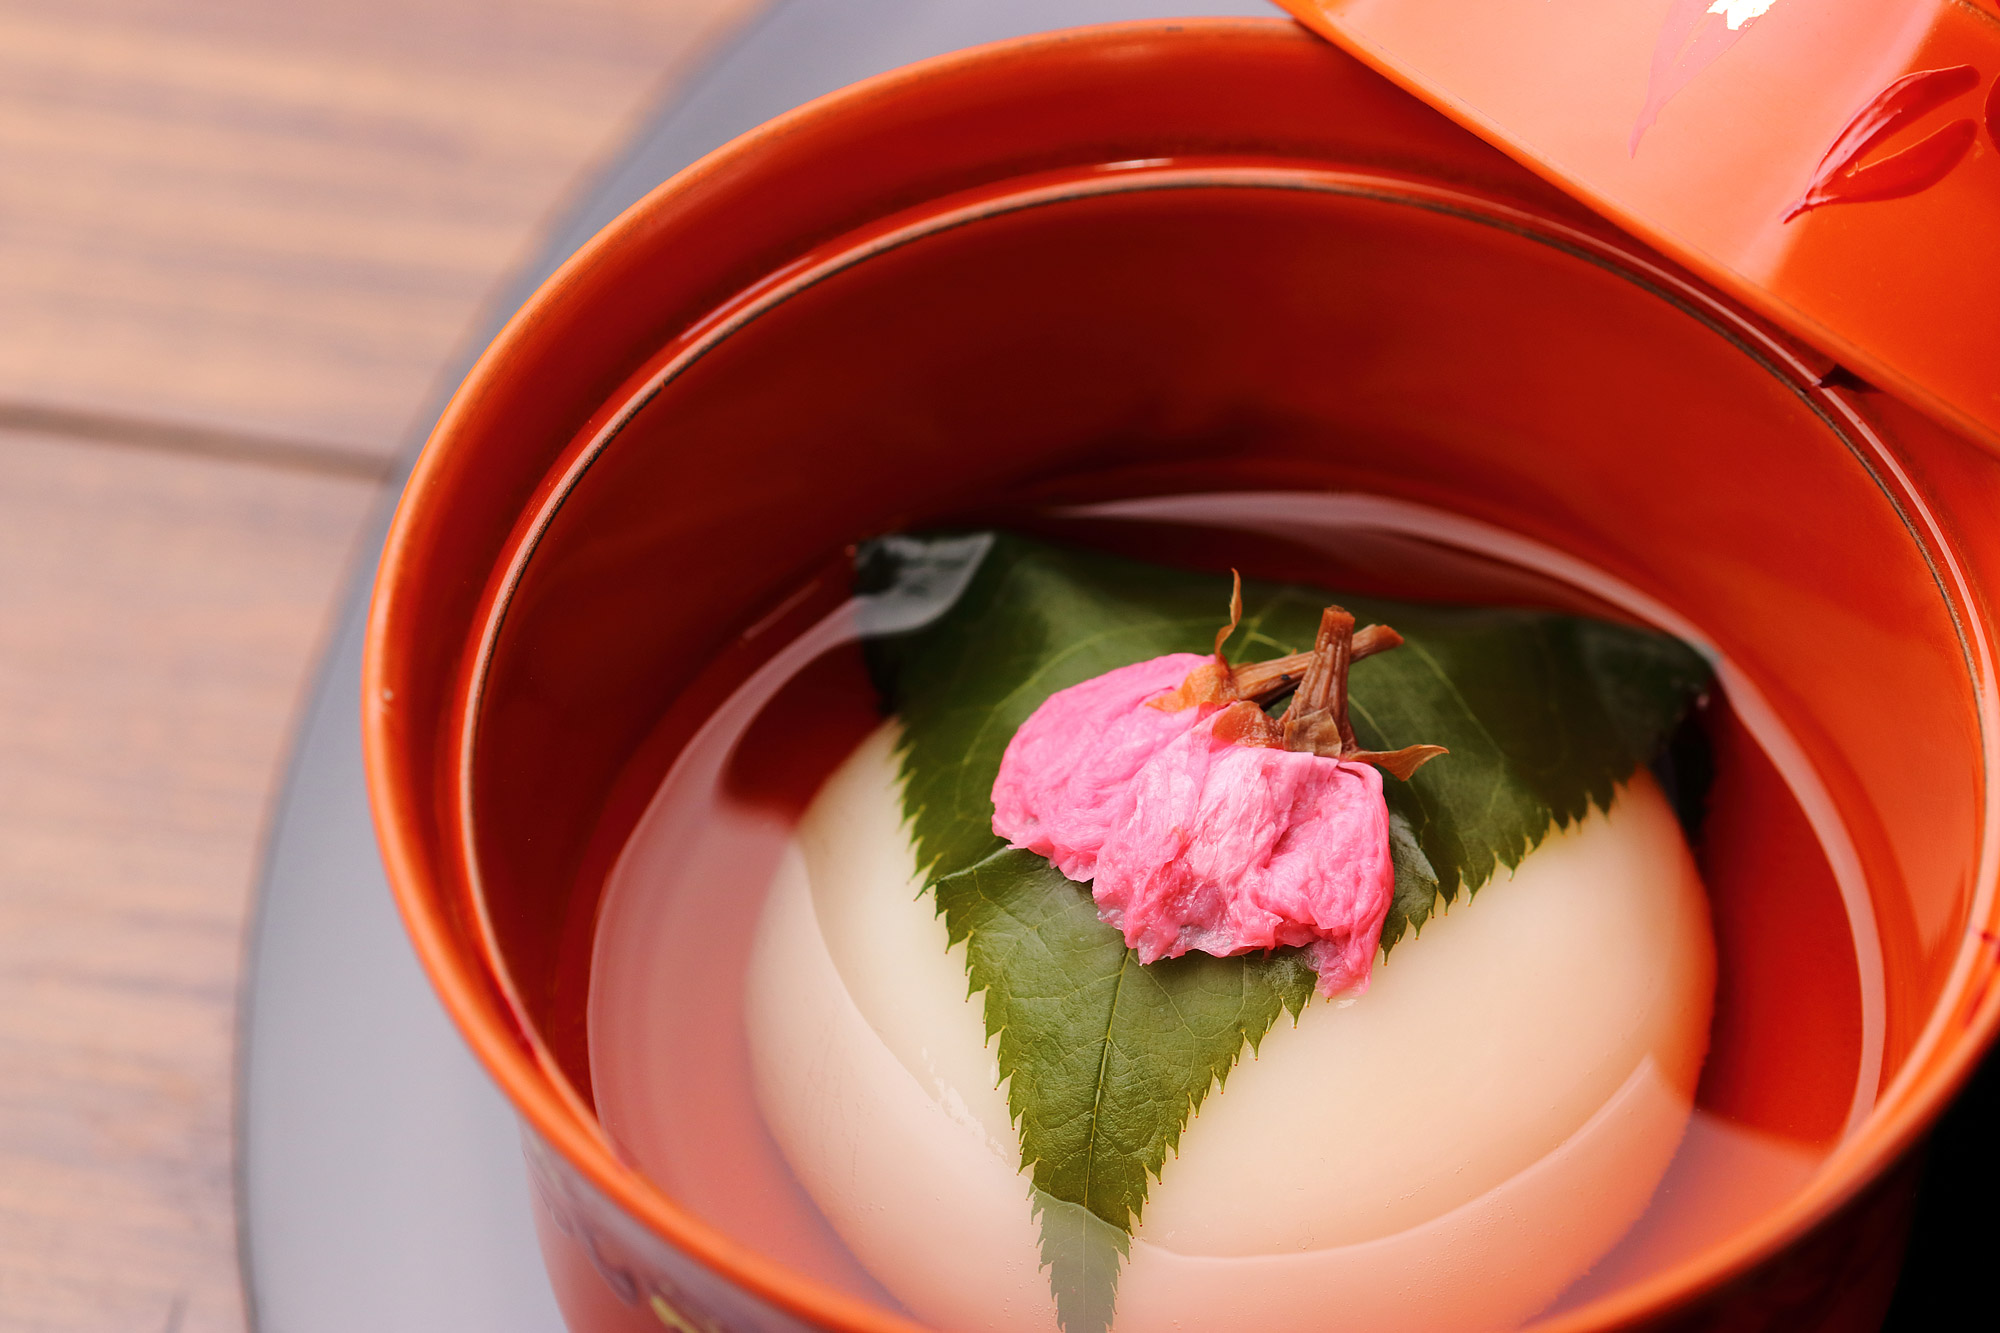 Japanese dish, artistically garnished, with cherry blossoms in a broth